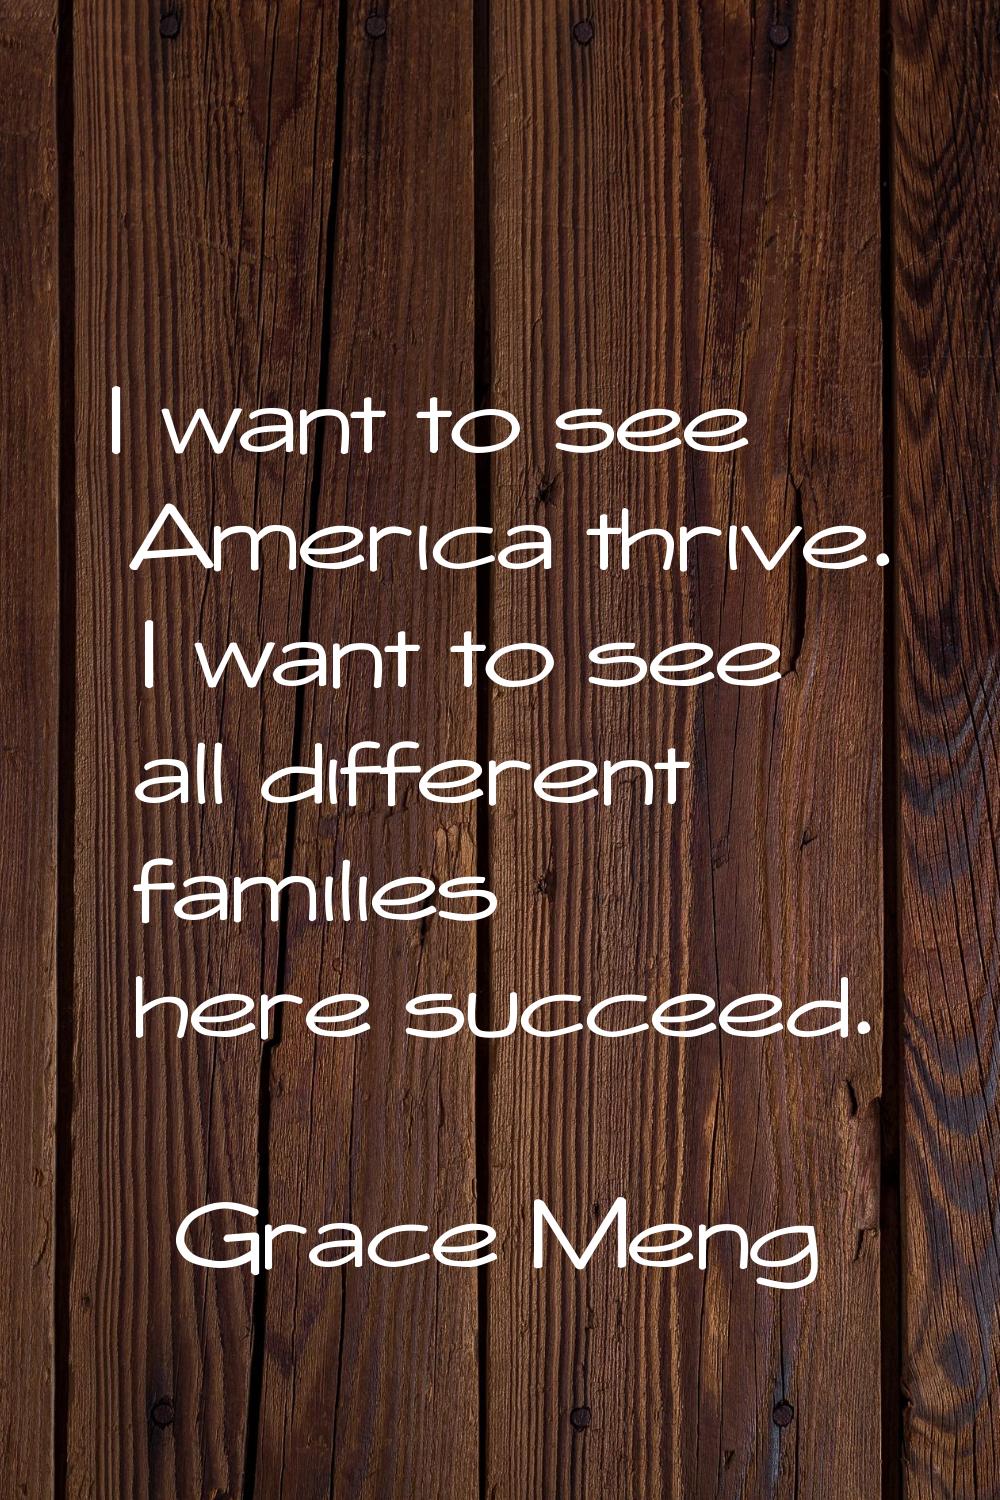 I want to see America thrive. I want to see all different families here succeed.